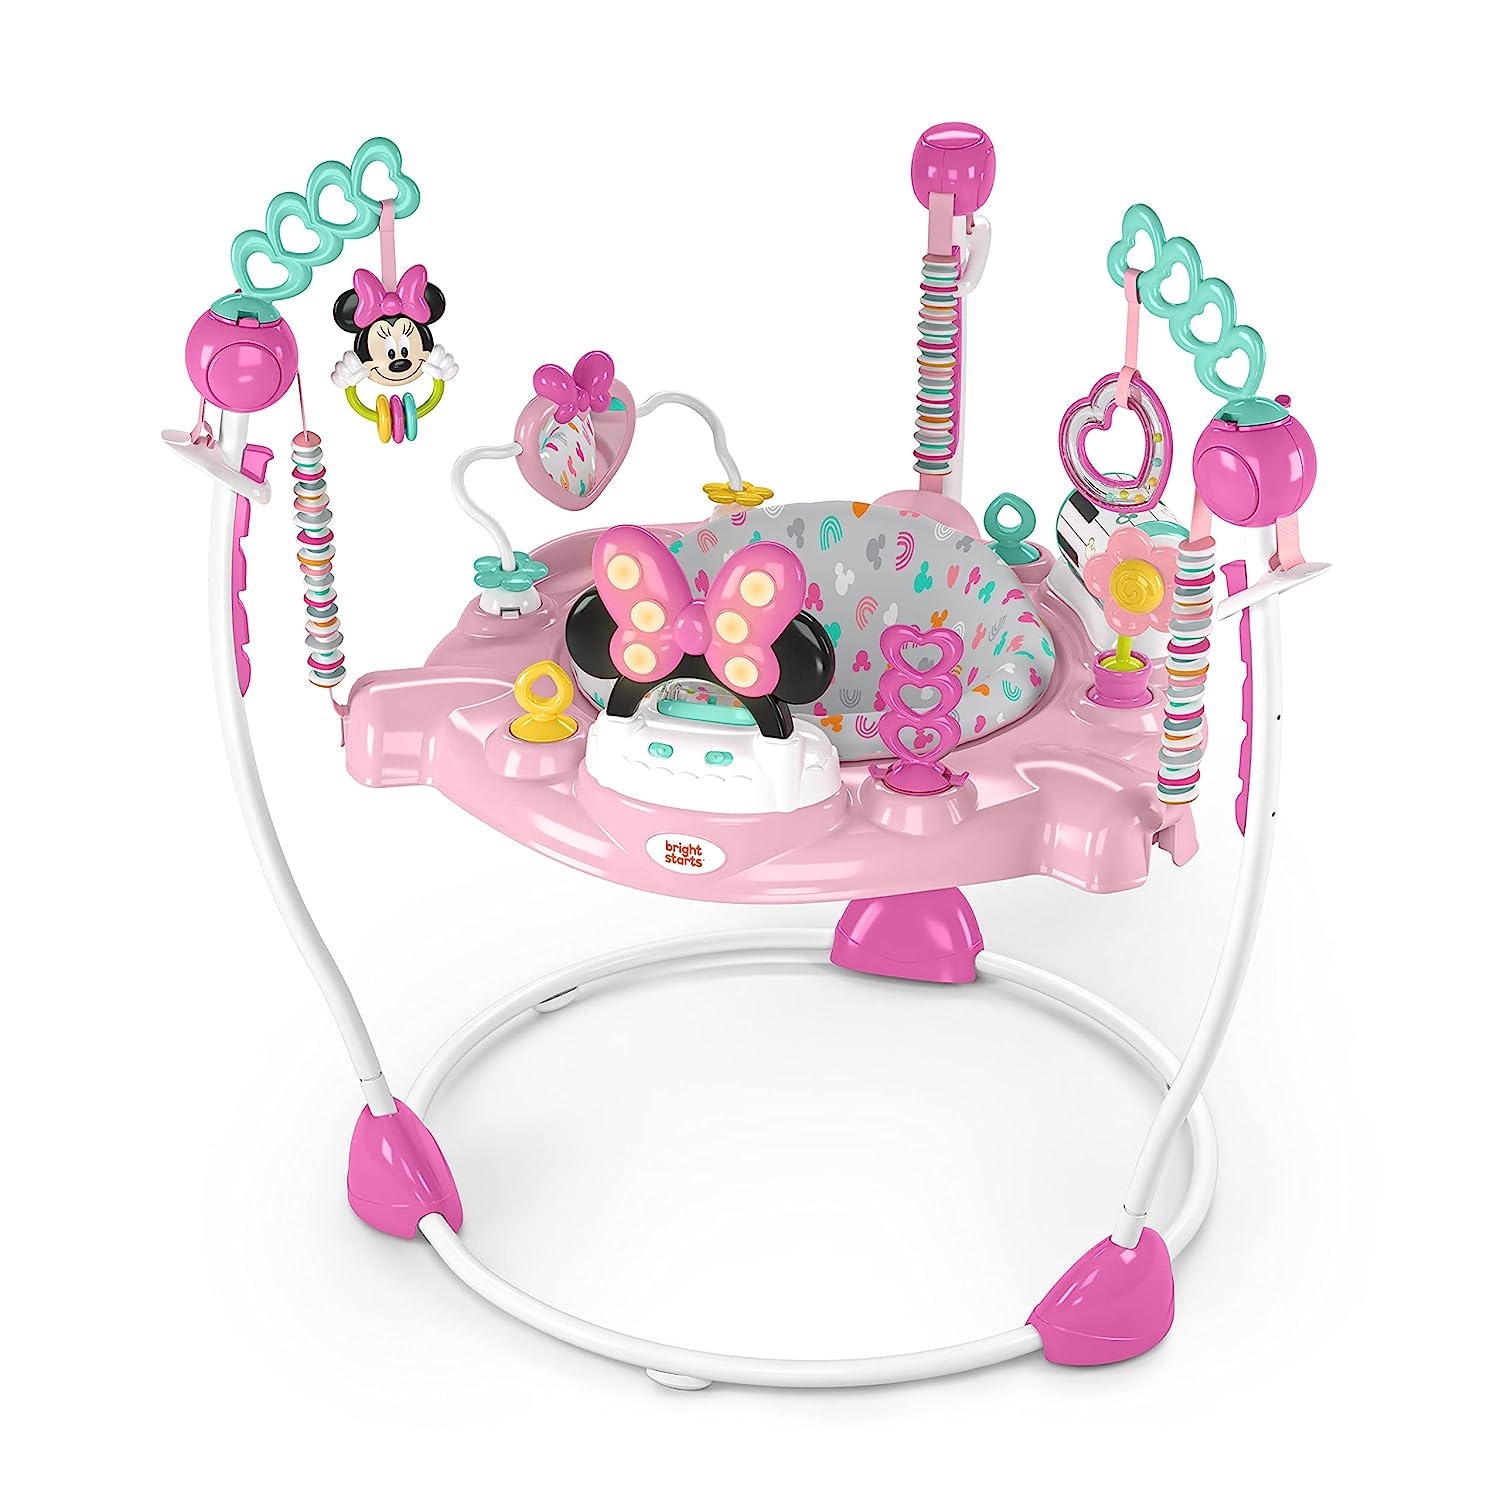 Disney Baby Minnie Mouse Forever Besties Baby Activity Center Jumper with 10 Toys, Lights & Sounds, 360-Degree Seat, 6-12 Months